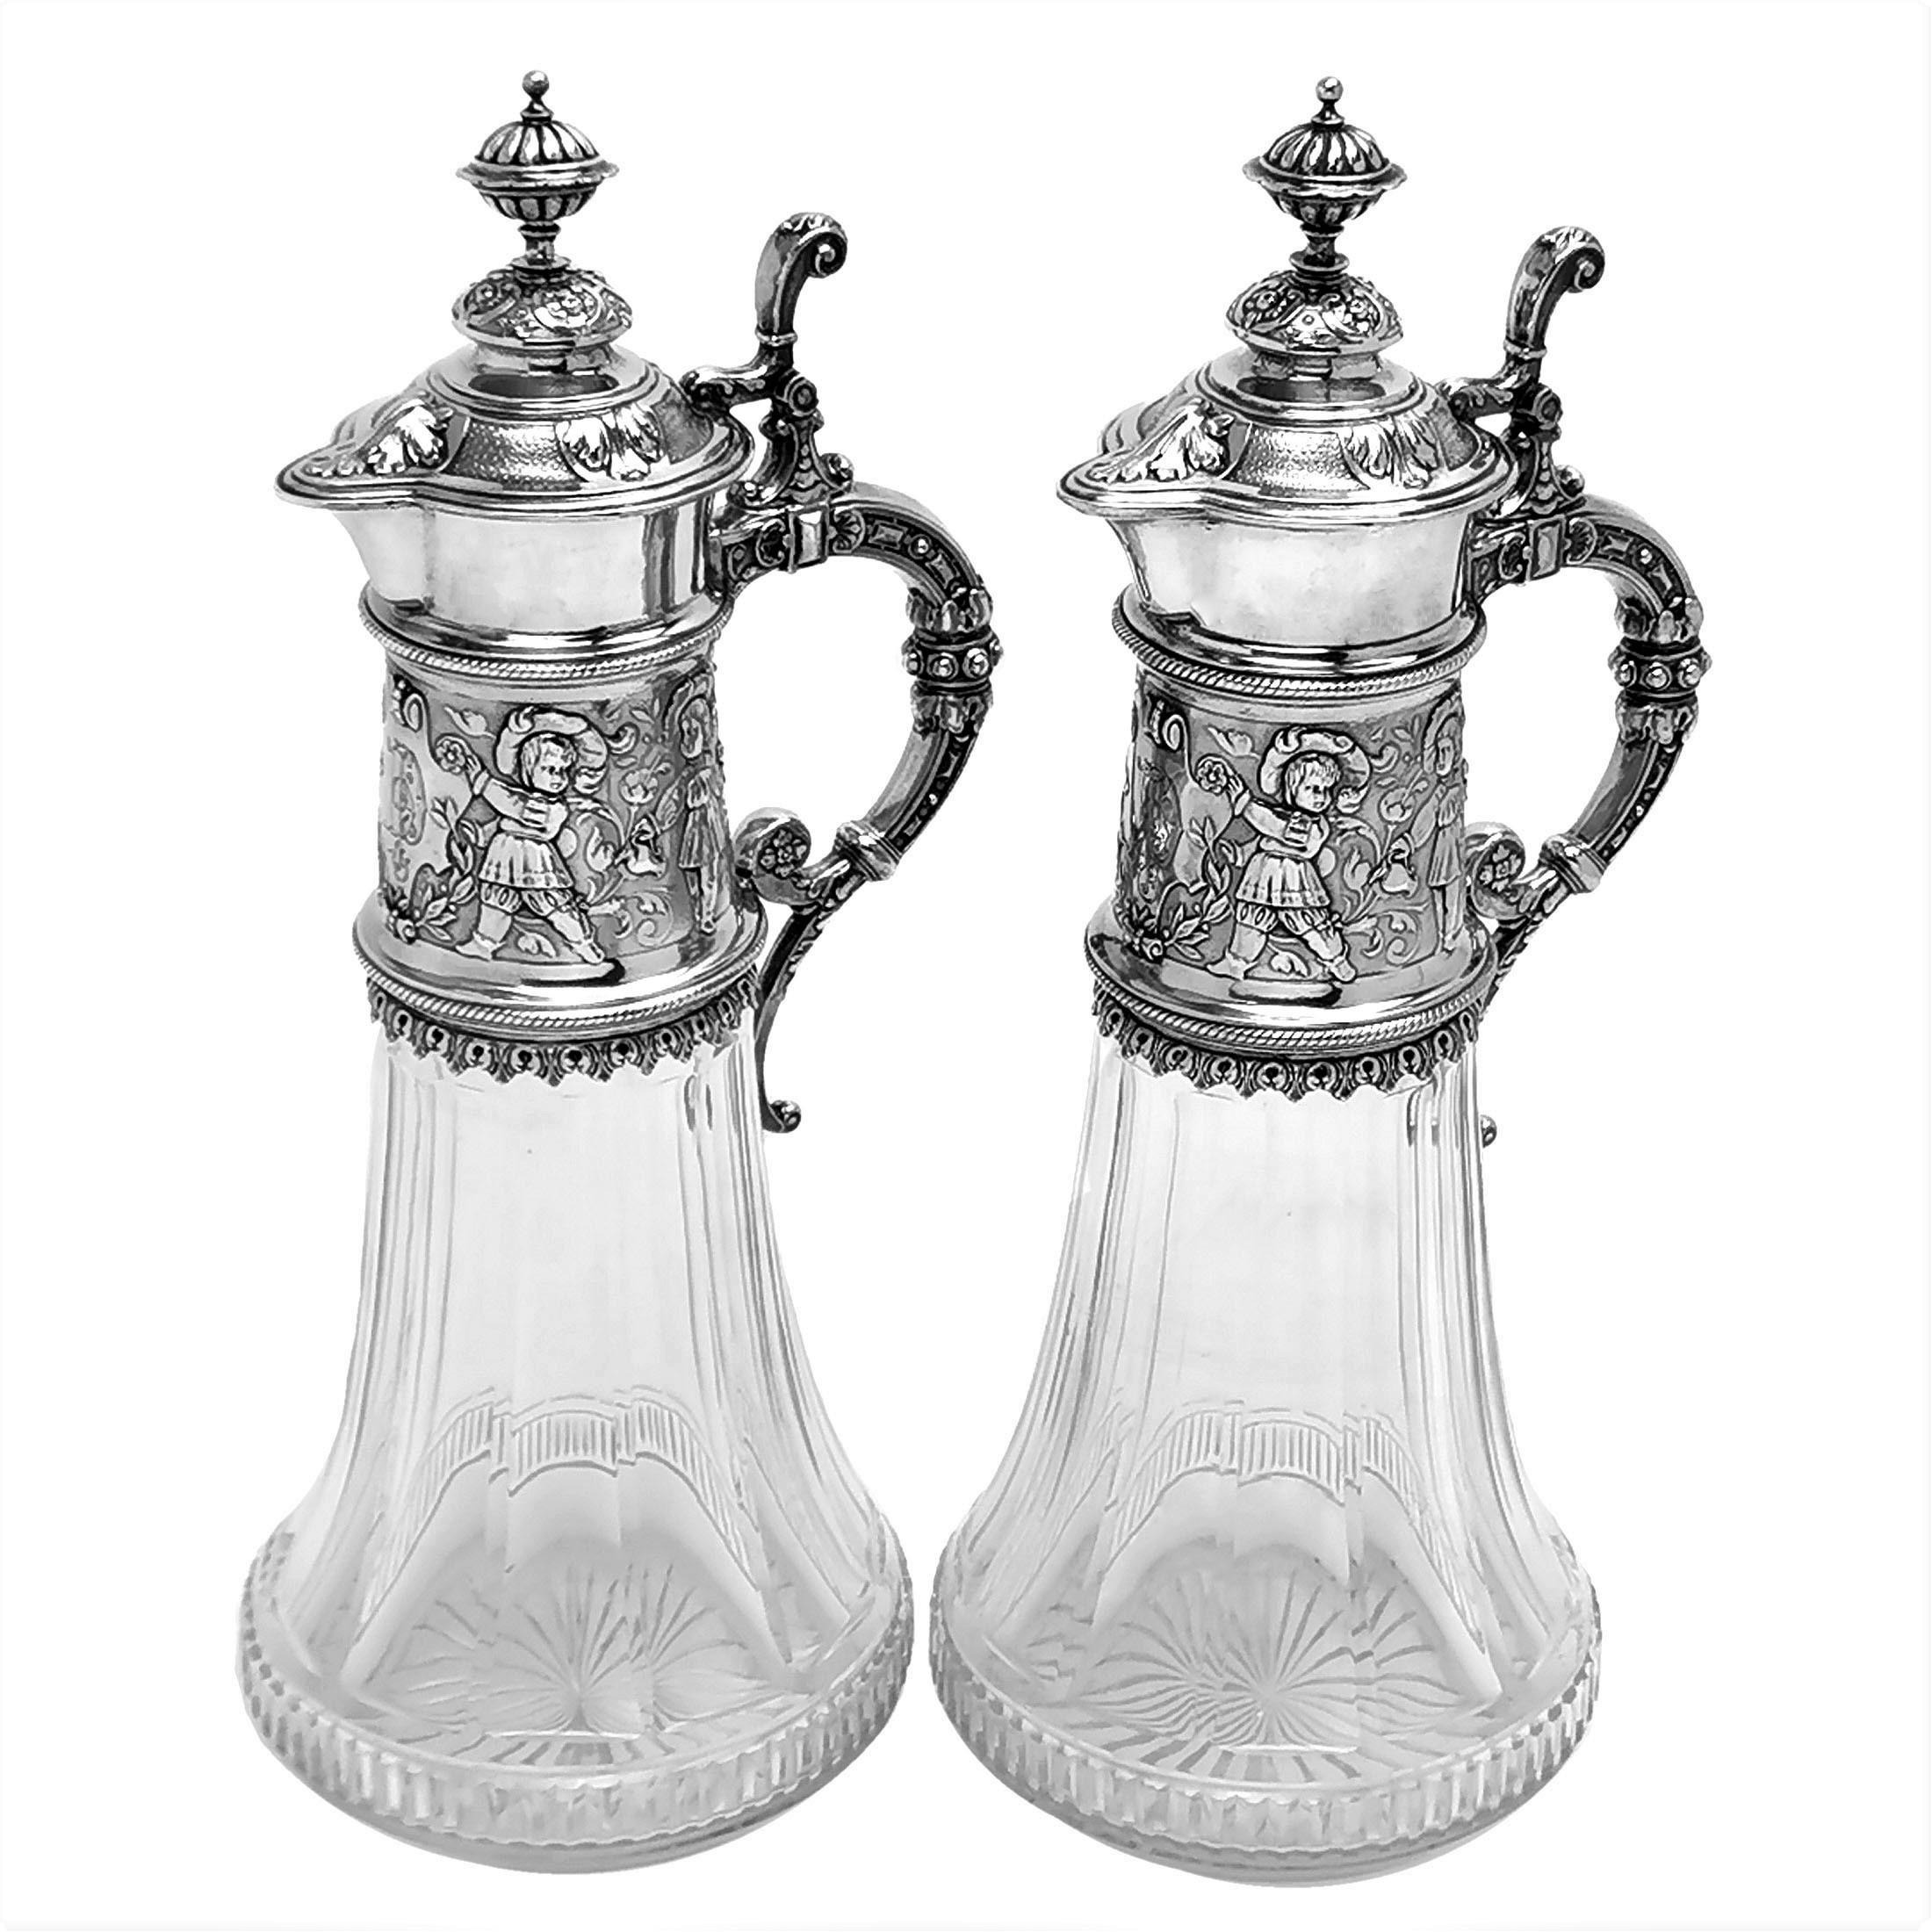 A pair of beautiful Antique German silver & glass Claret Jugs with an elegant fluted cut glass body and an ornate solid Silver neck, handle and hinged lid. The wide neck of the Wine Jug has a band of intricately chased decorations showing a pair of